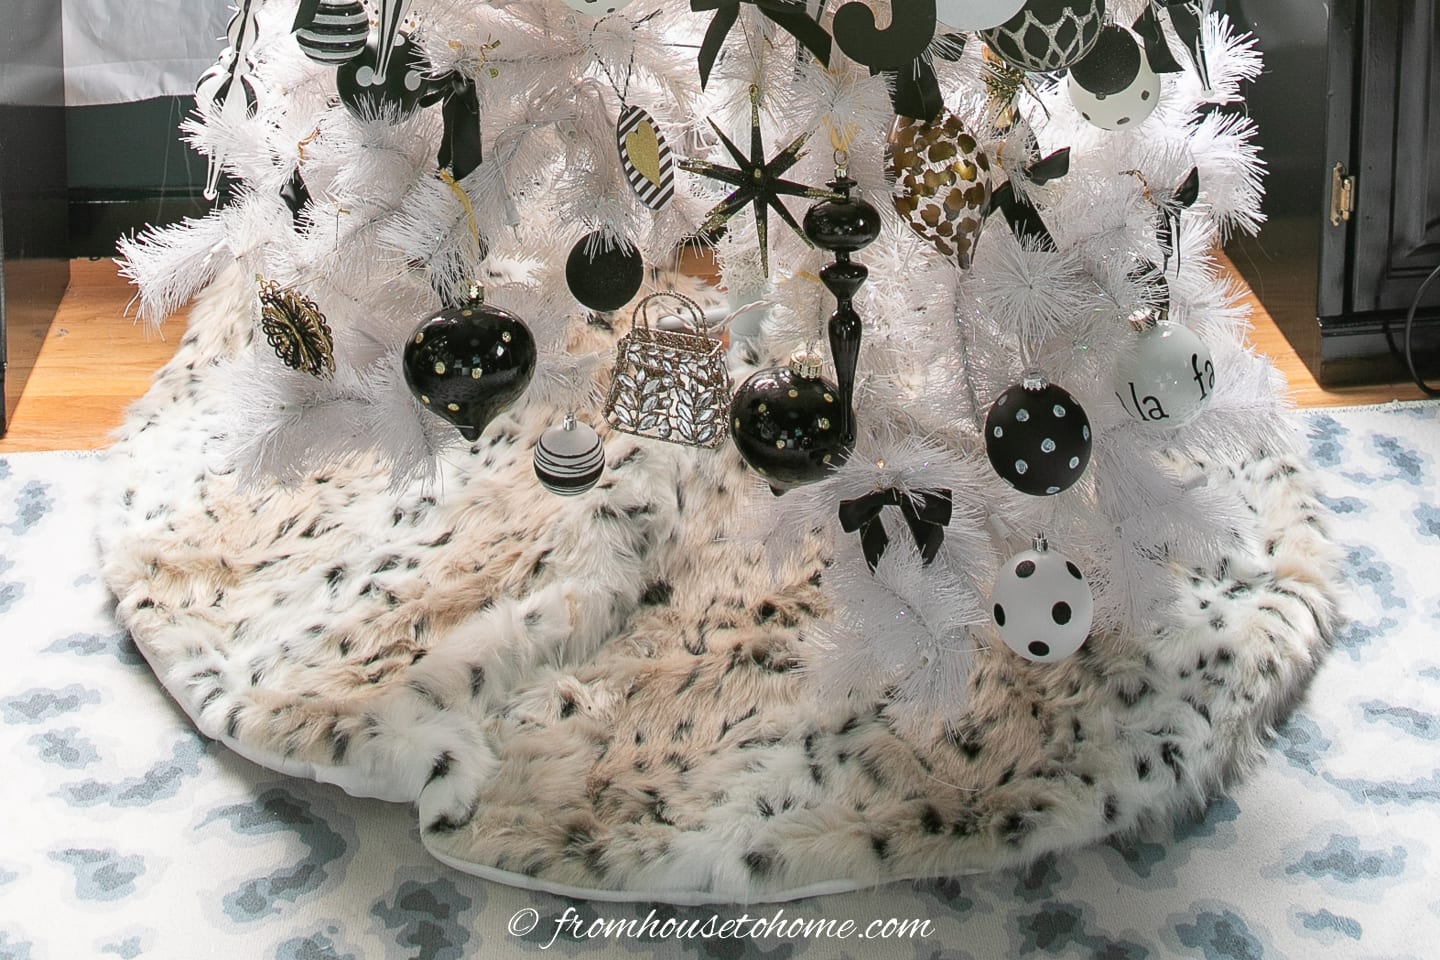 A leopard print tree skirt under a white Christmas tree with black ornaments